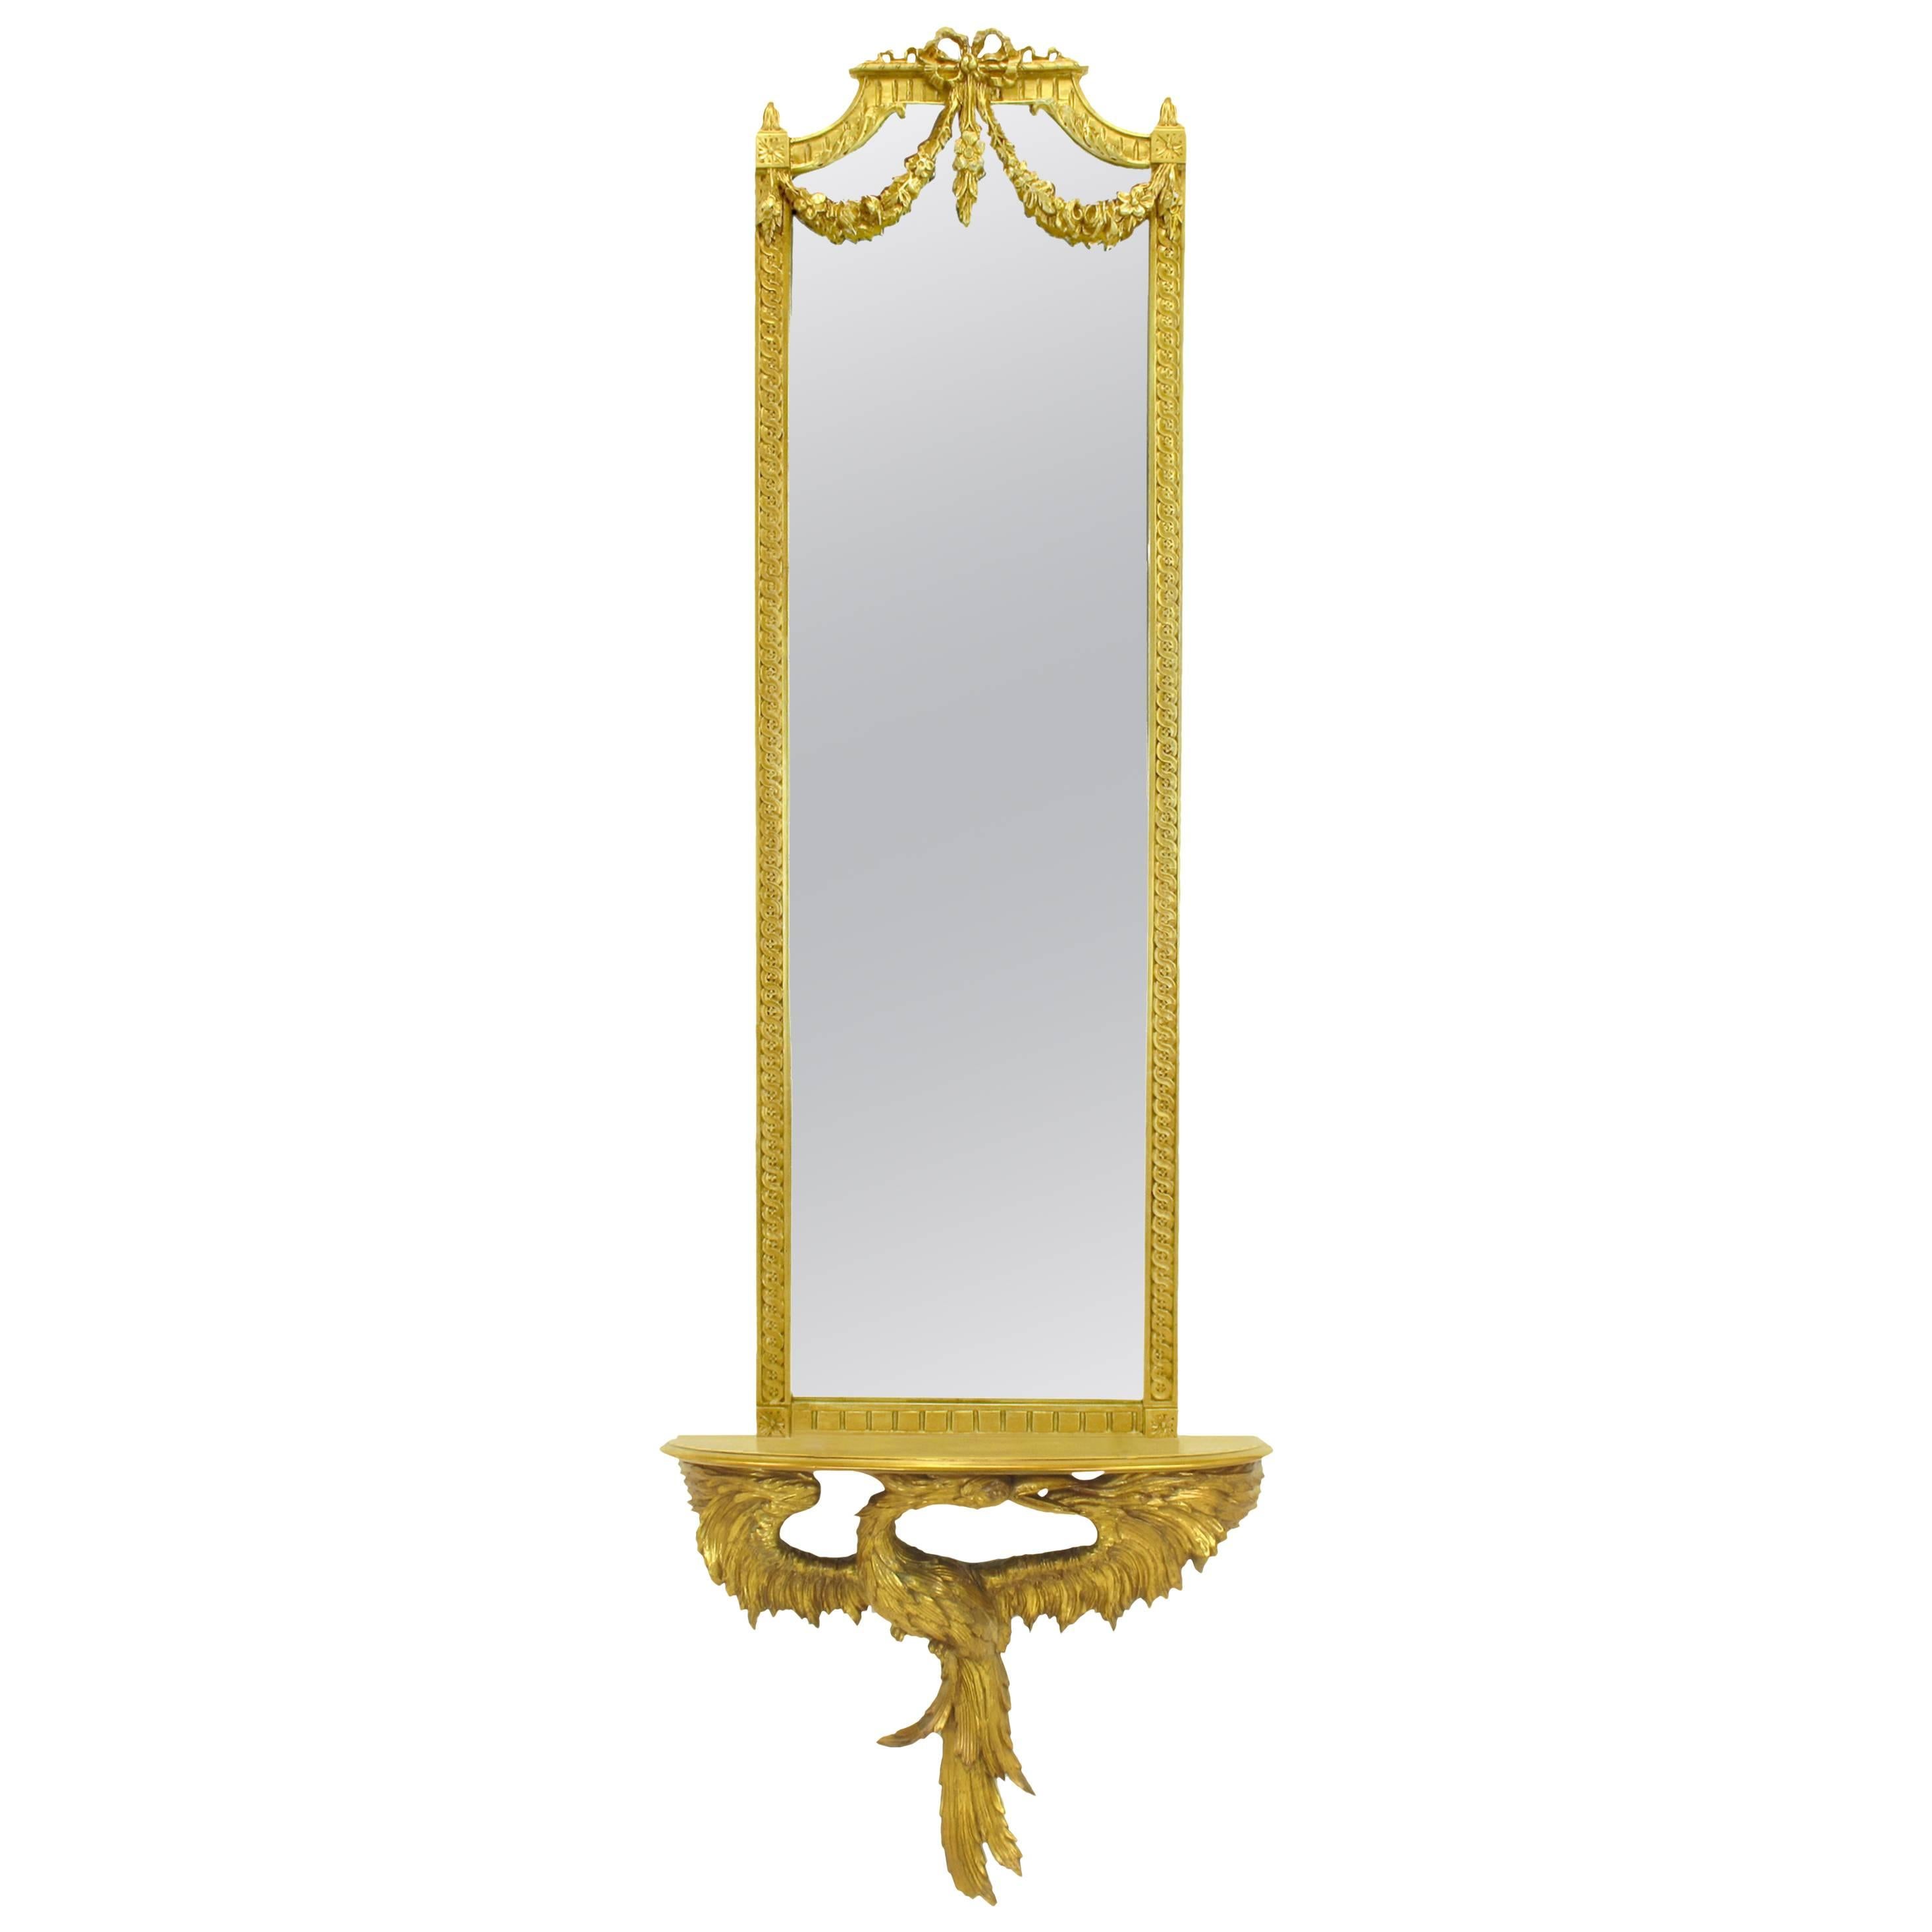 Early 20th Century Italian Giltwood Phoenix Wall Mounted Console and Mirror